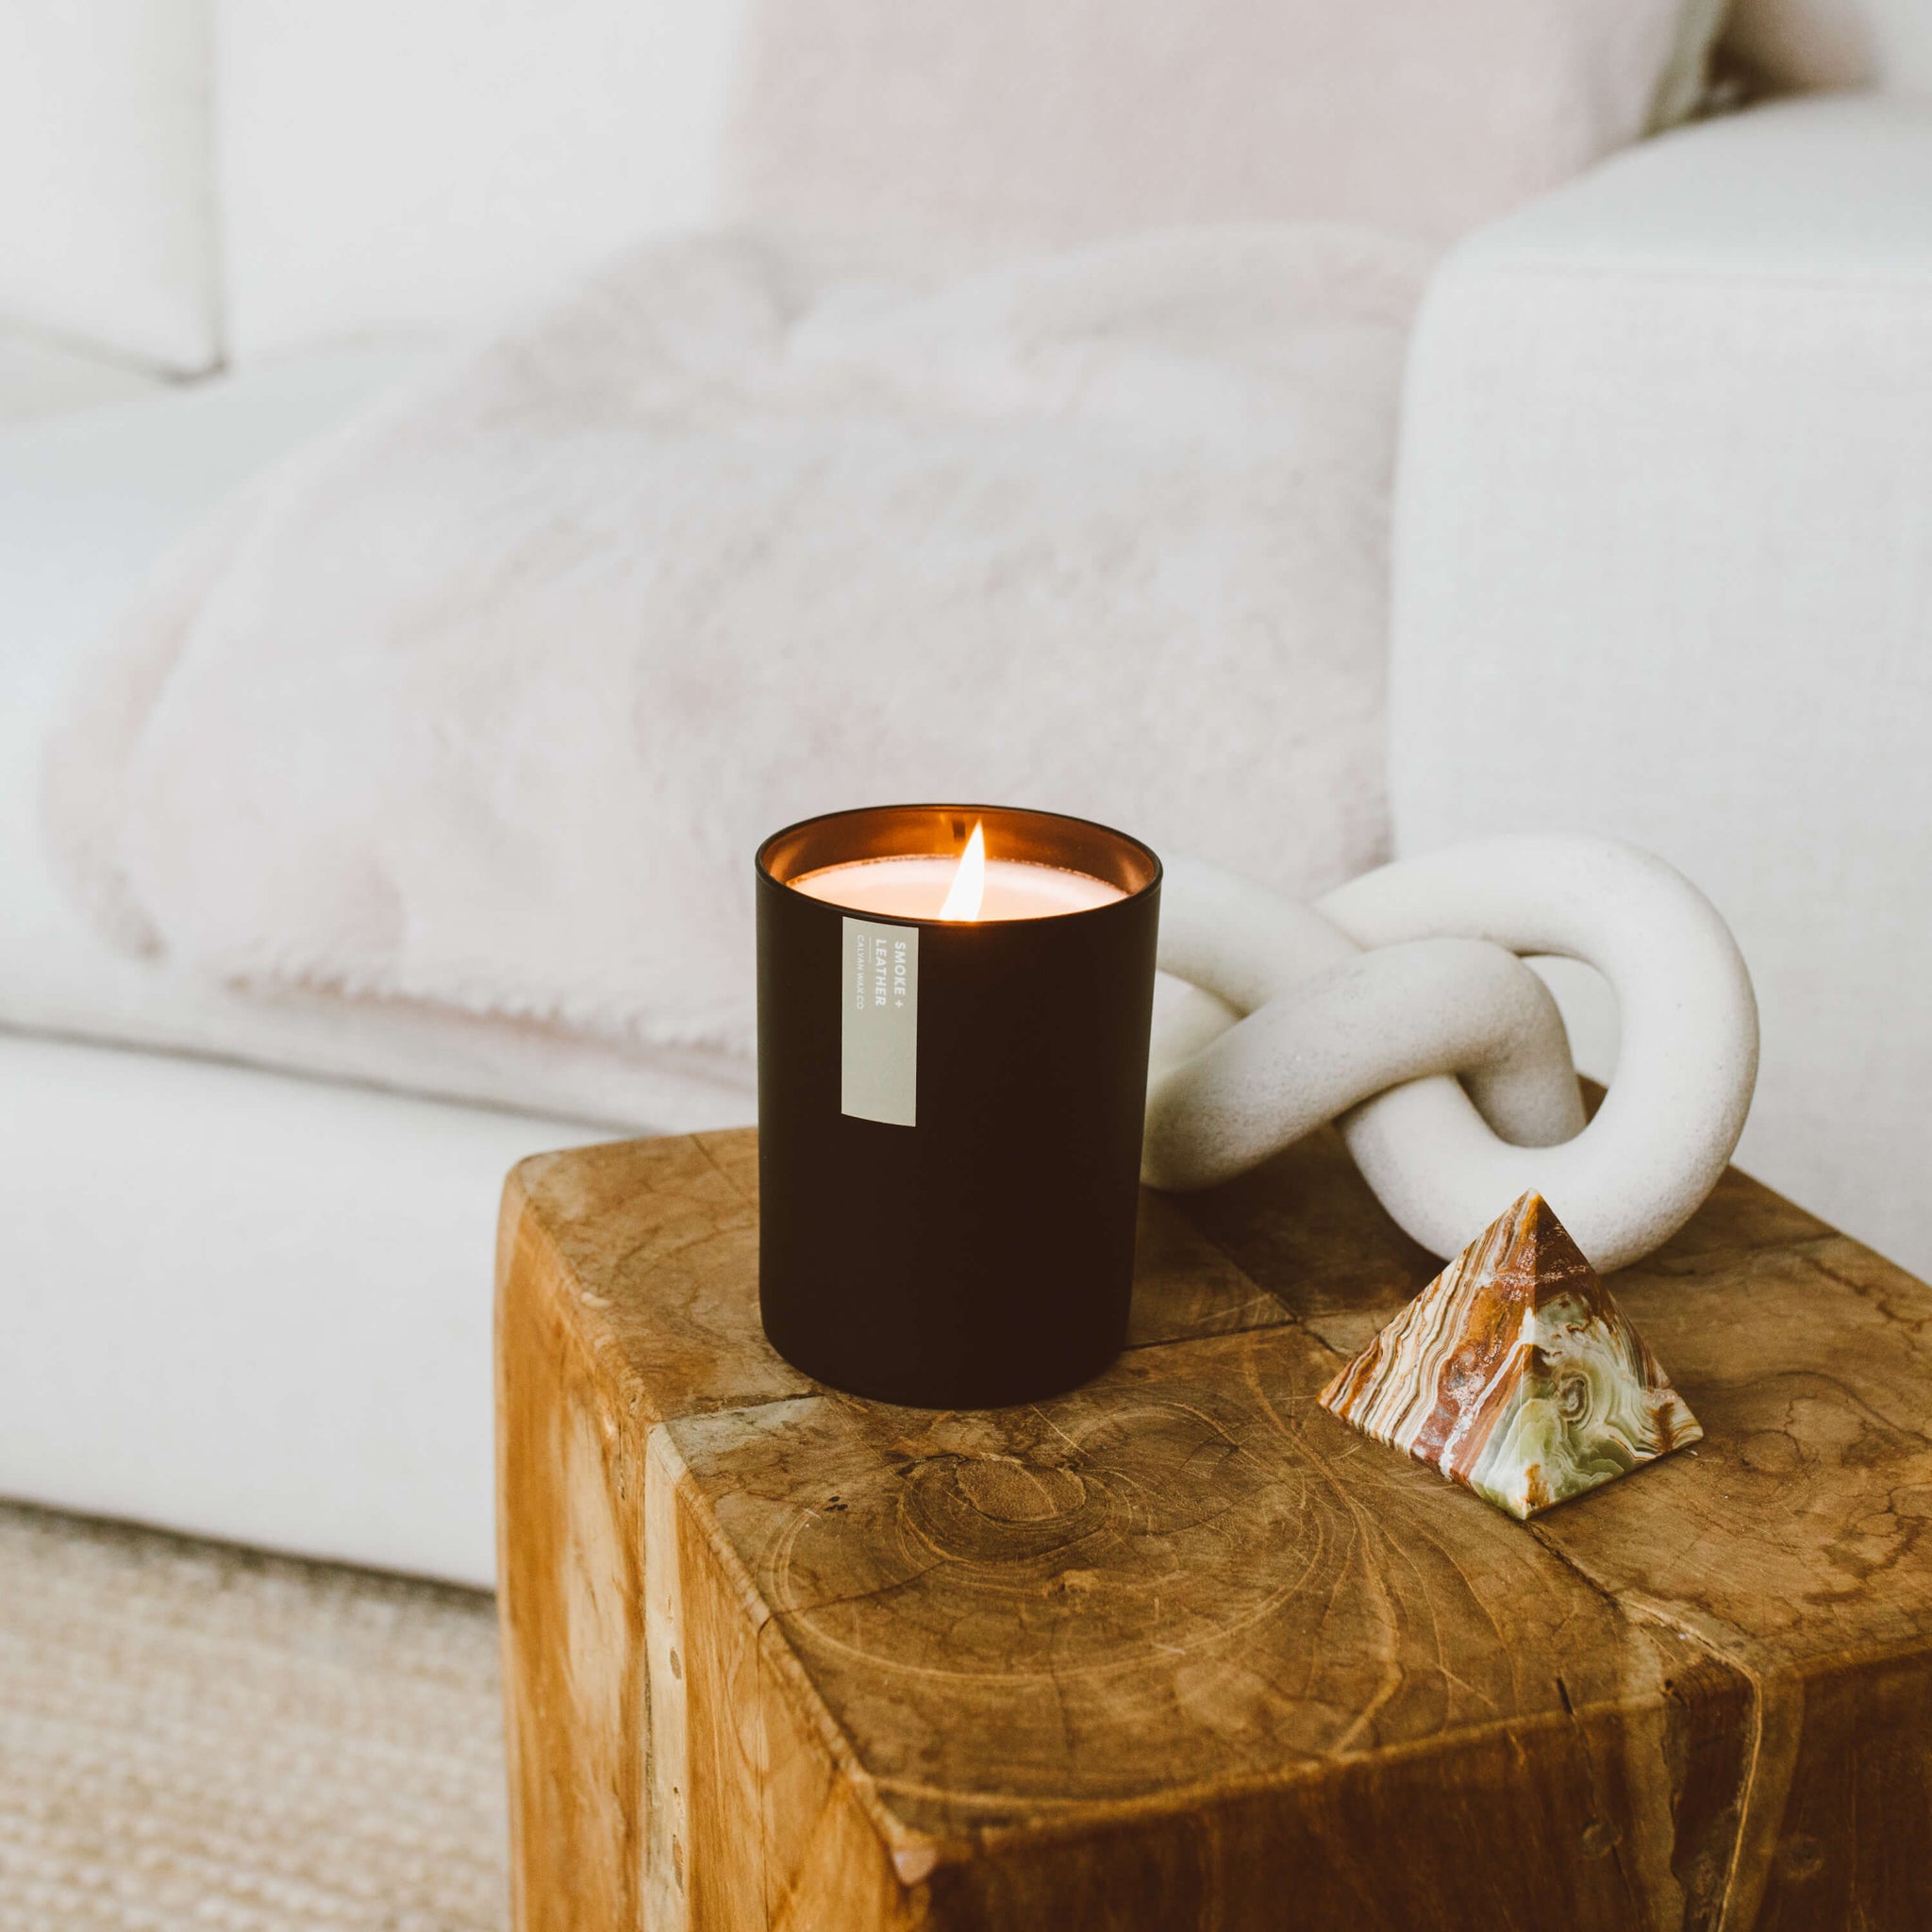 Matte Black Wood Wick Soy Candle